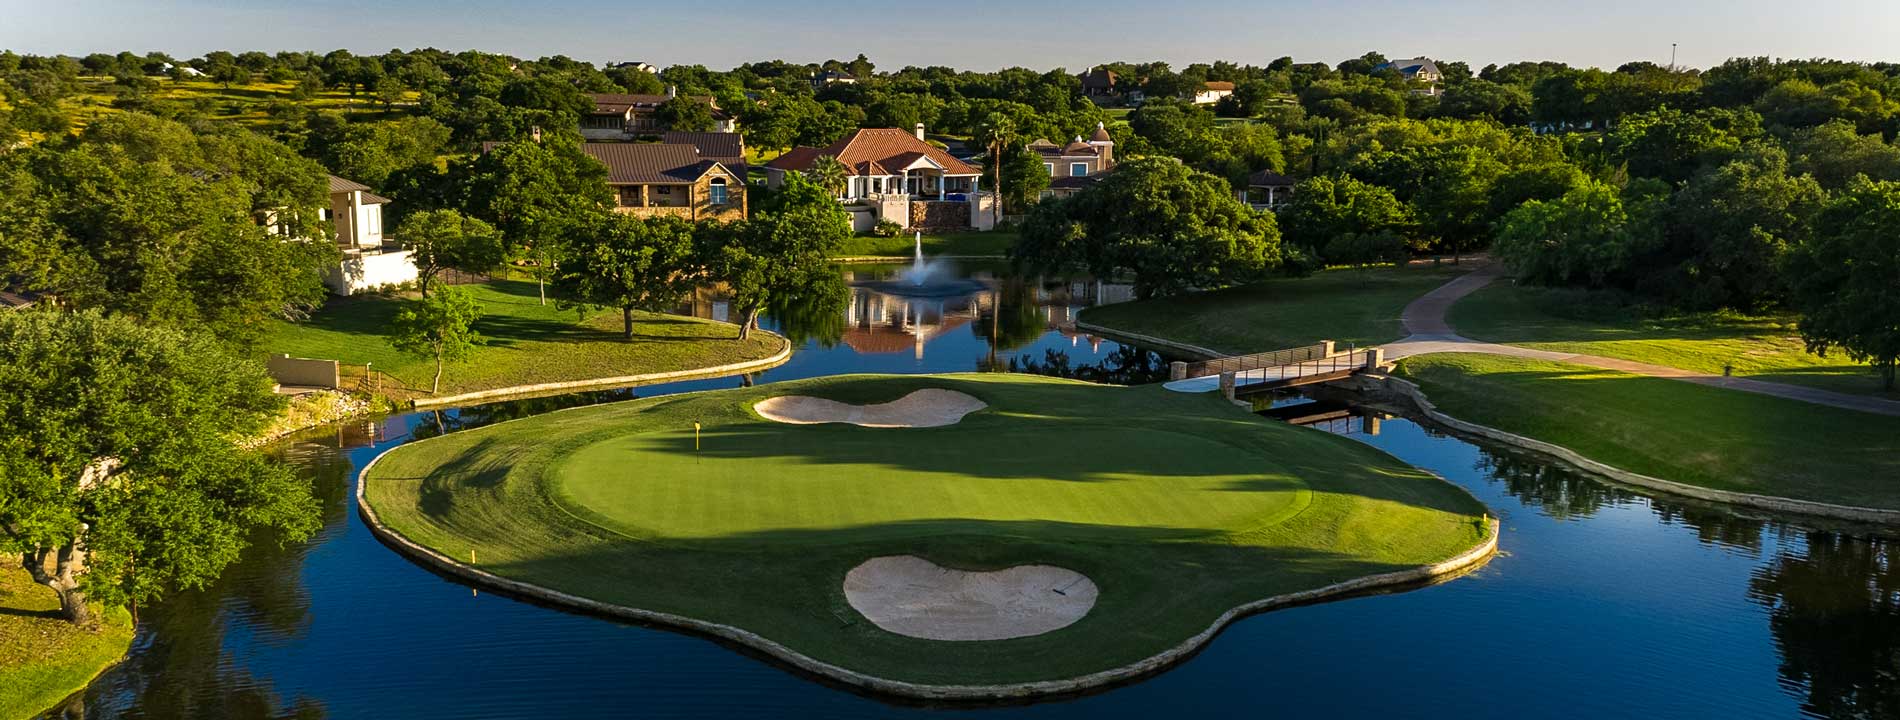 Horseshoe Bay, the founding site of the Texas Hill Country golf boom, is in better shape than ever with three newly renovated golf courses.